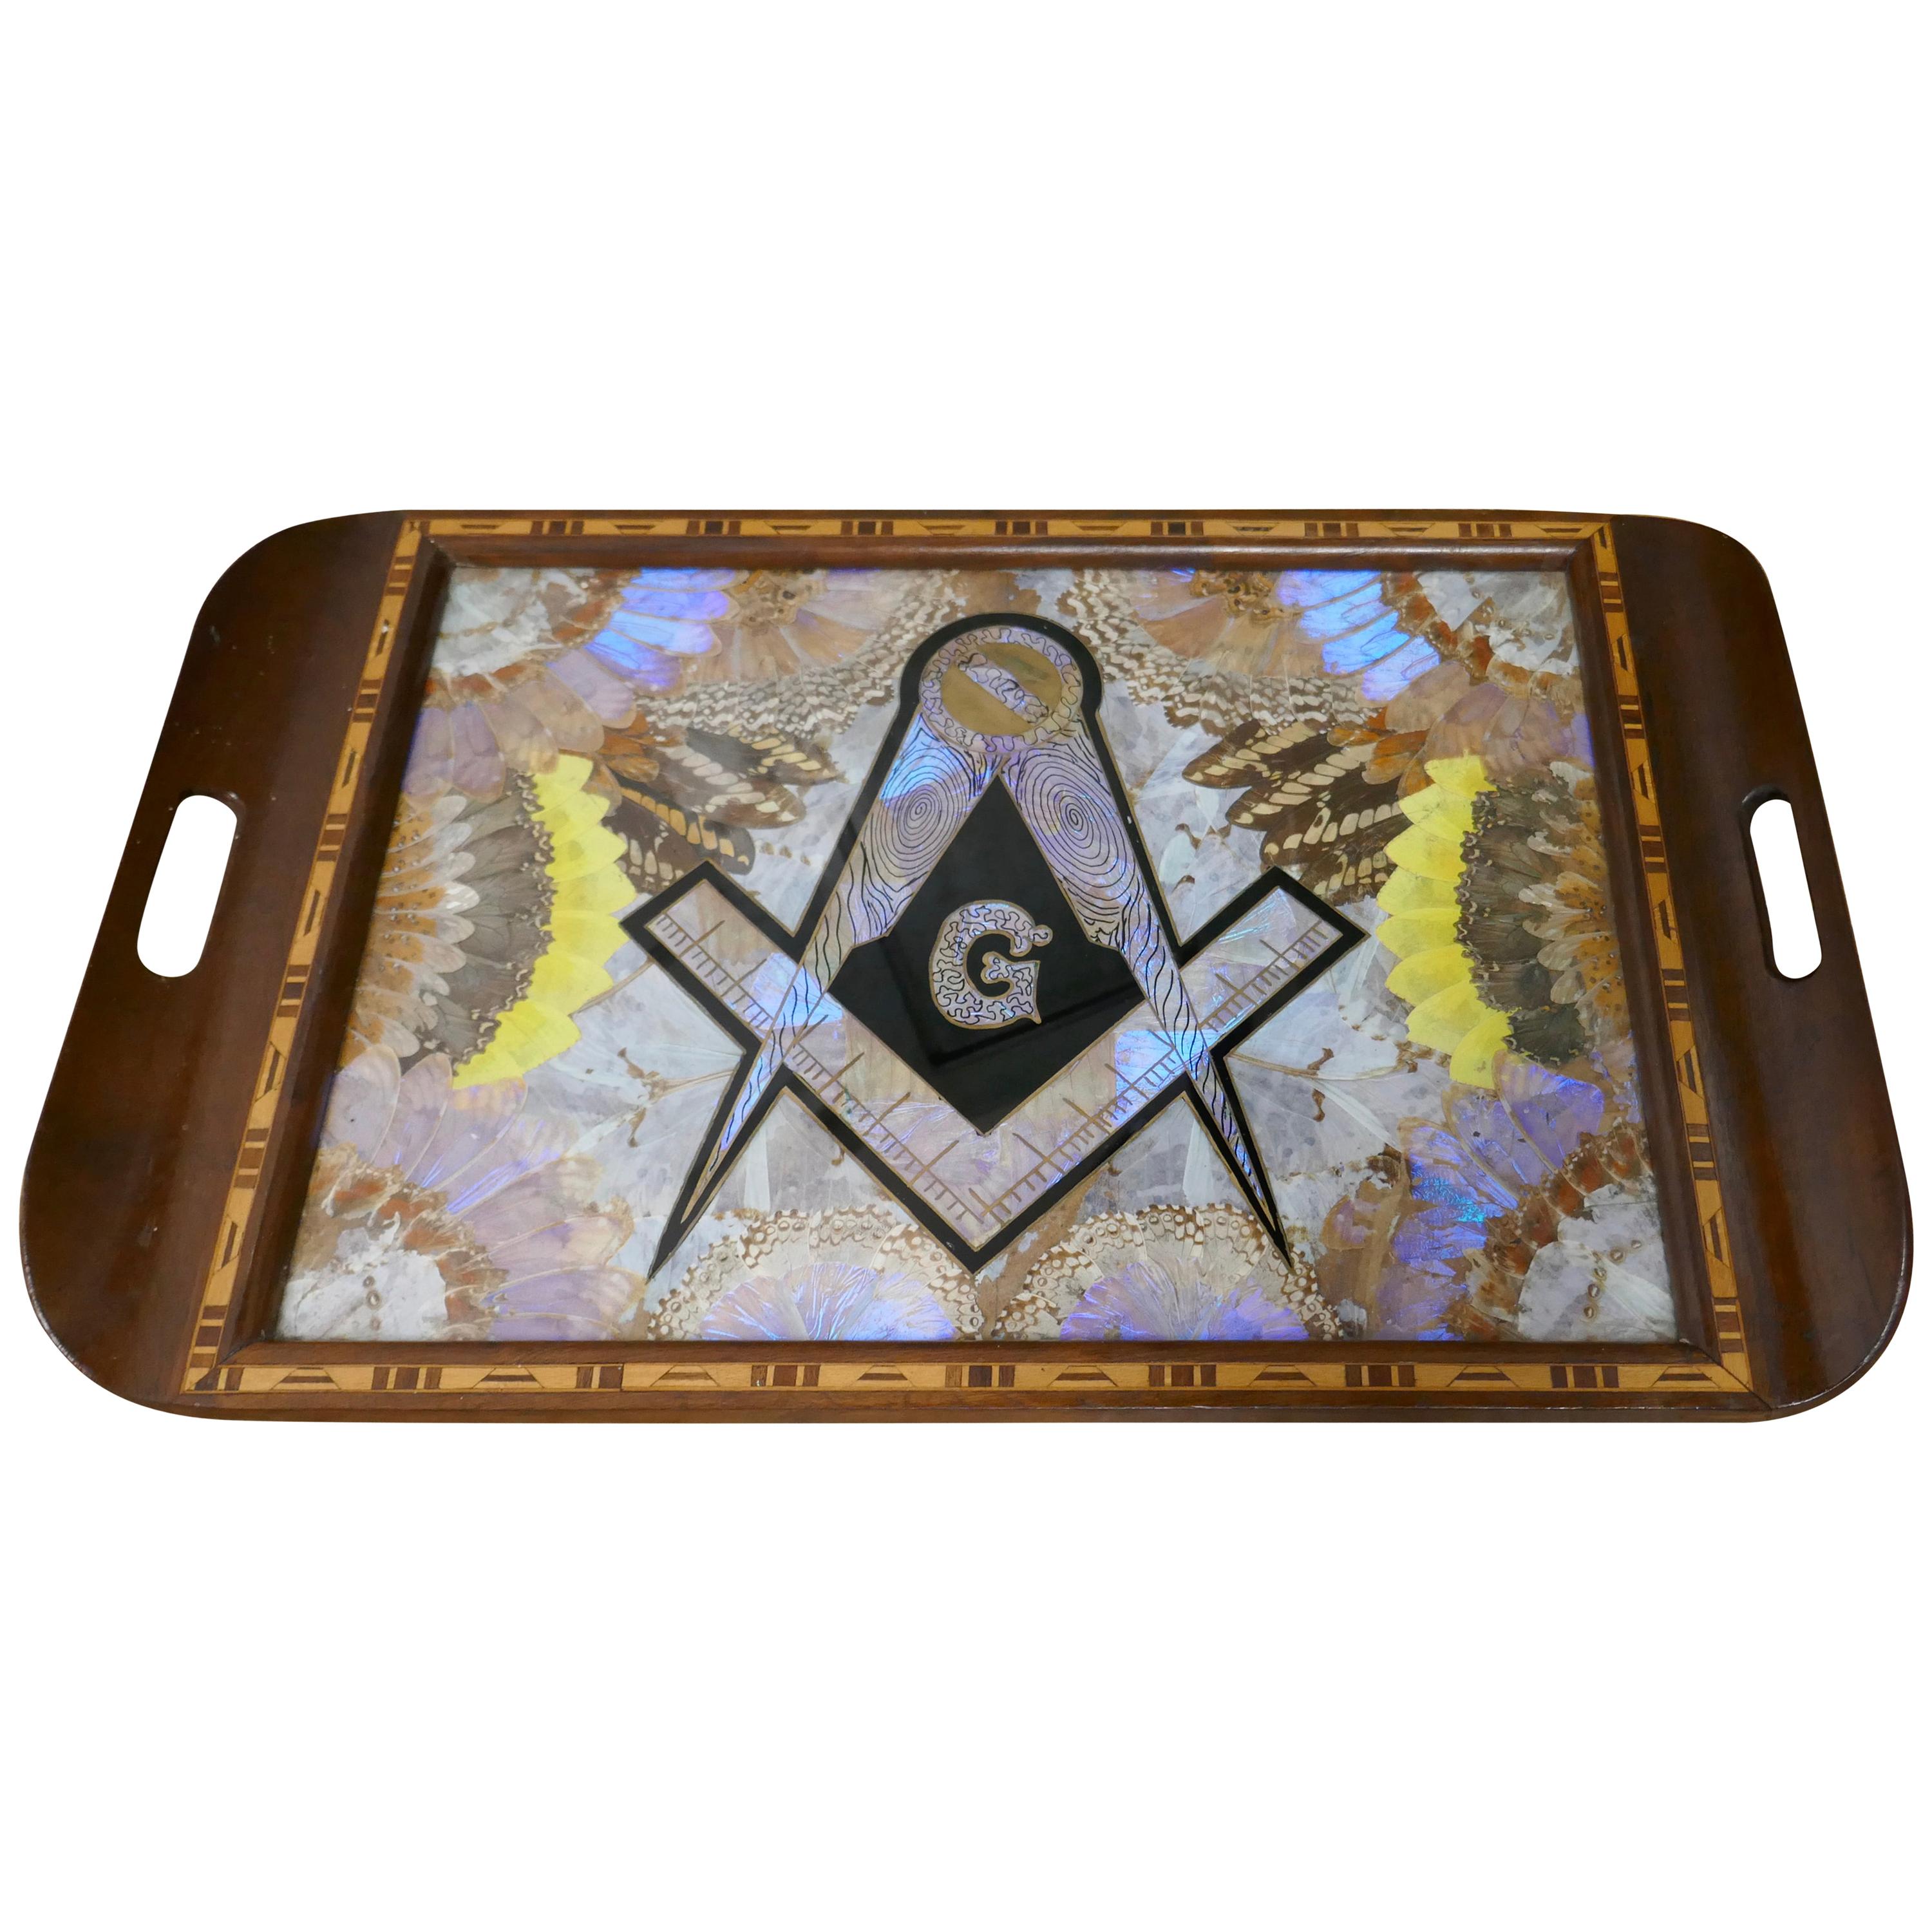 Masonic Tunbridge Wear Tray with Butterfly Wing Decoration For Sale